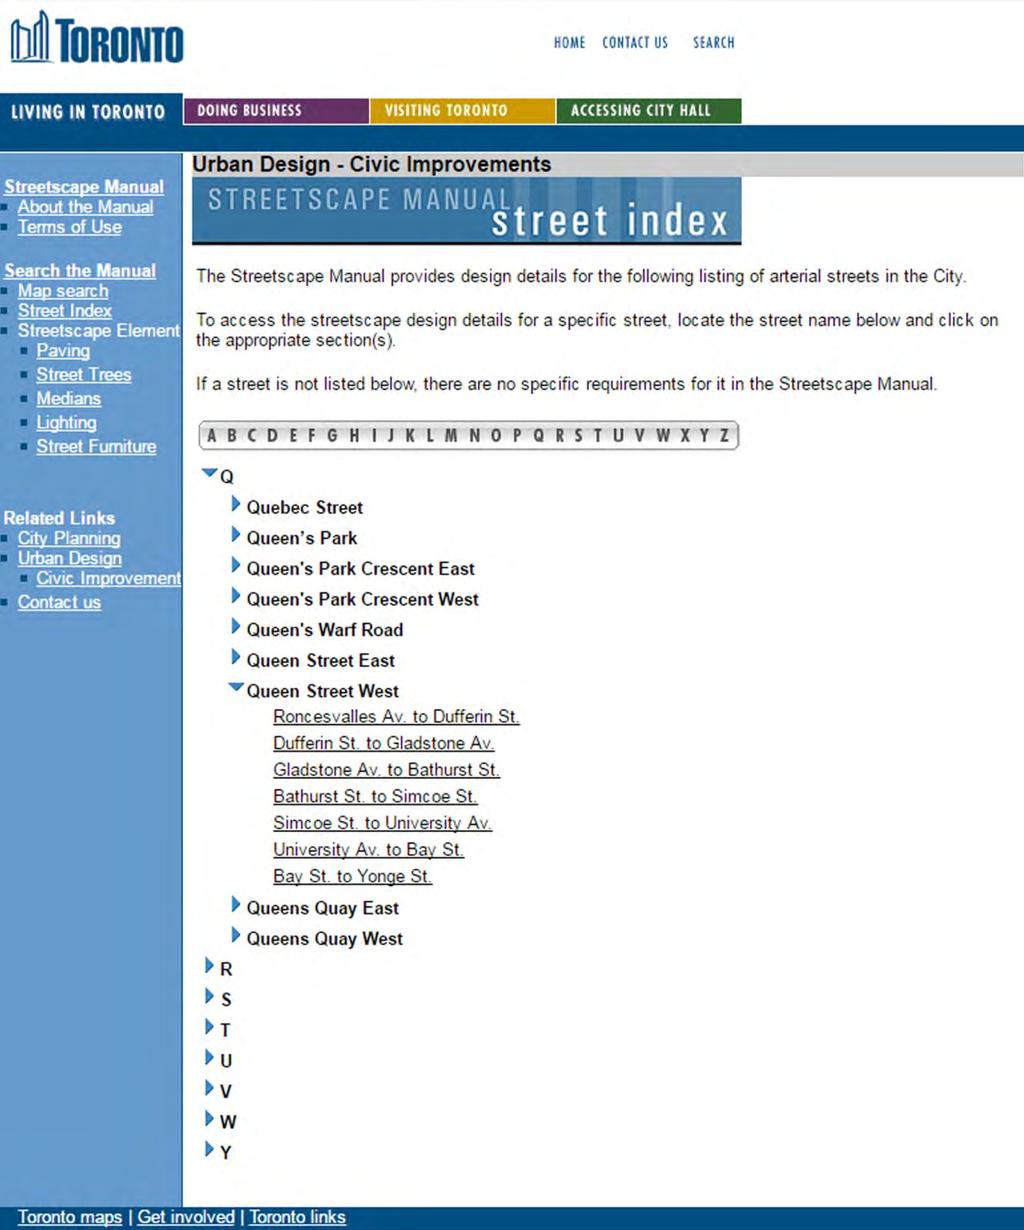 Use the alpha toolbar to look up the street name, then click on the